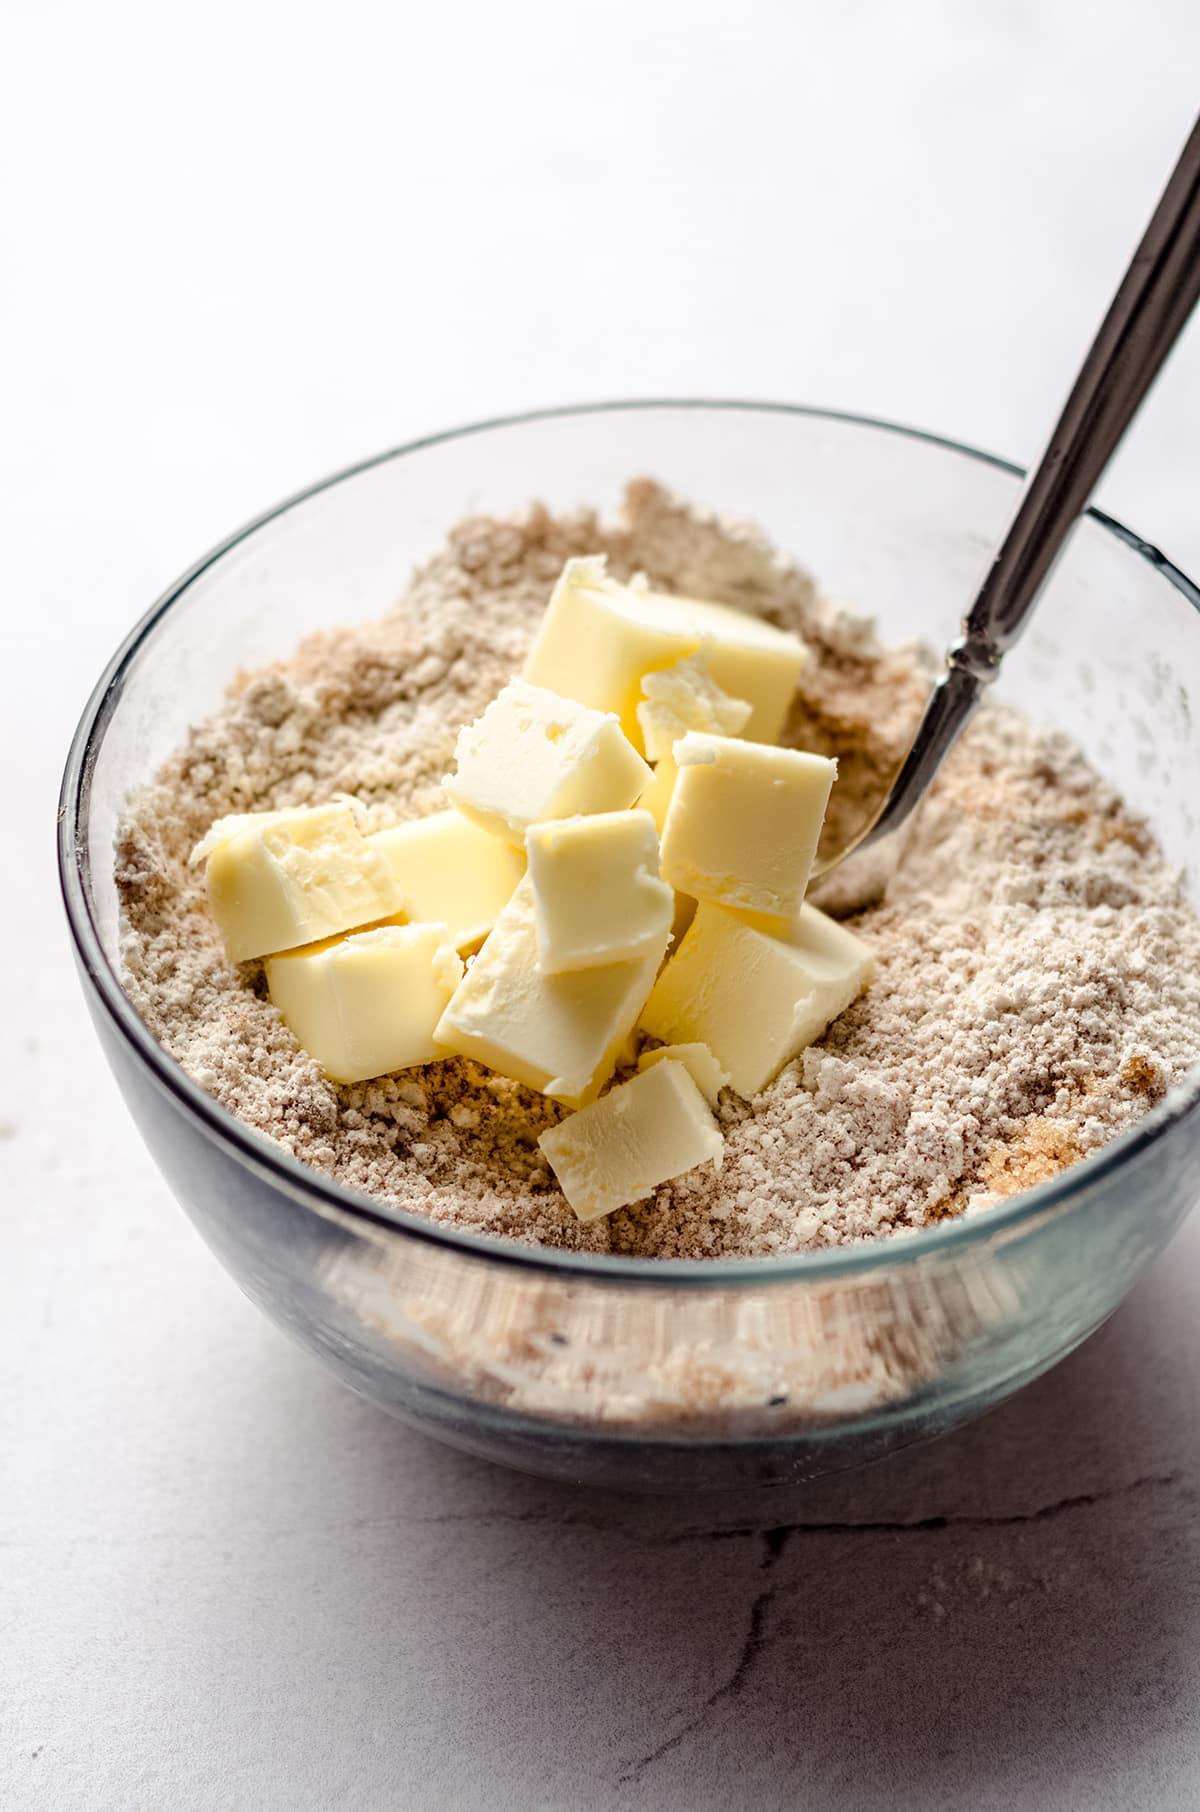 Adding cold butter to a bowl with a crumb mixture.